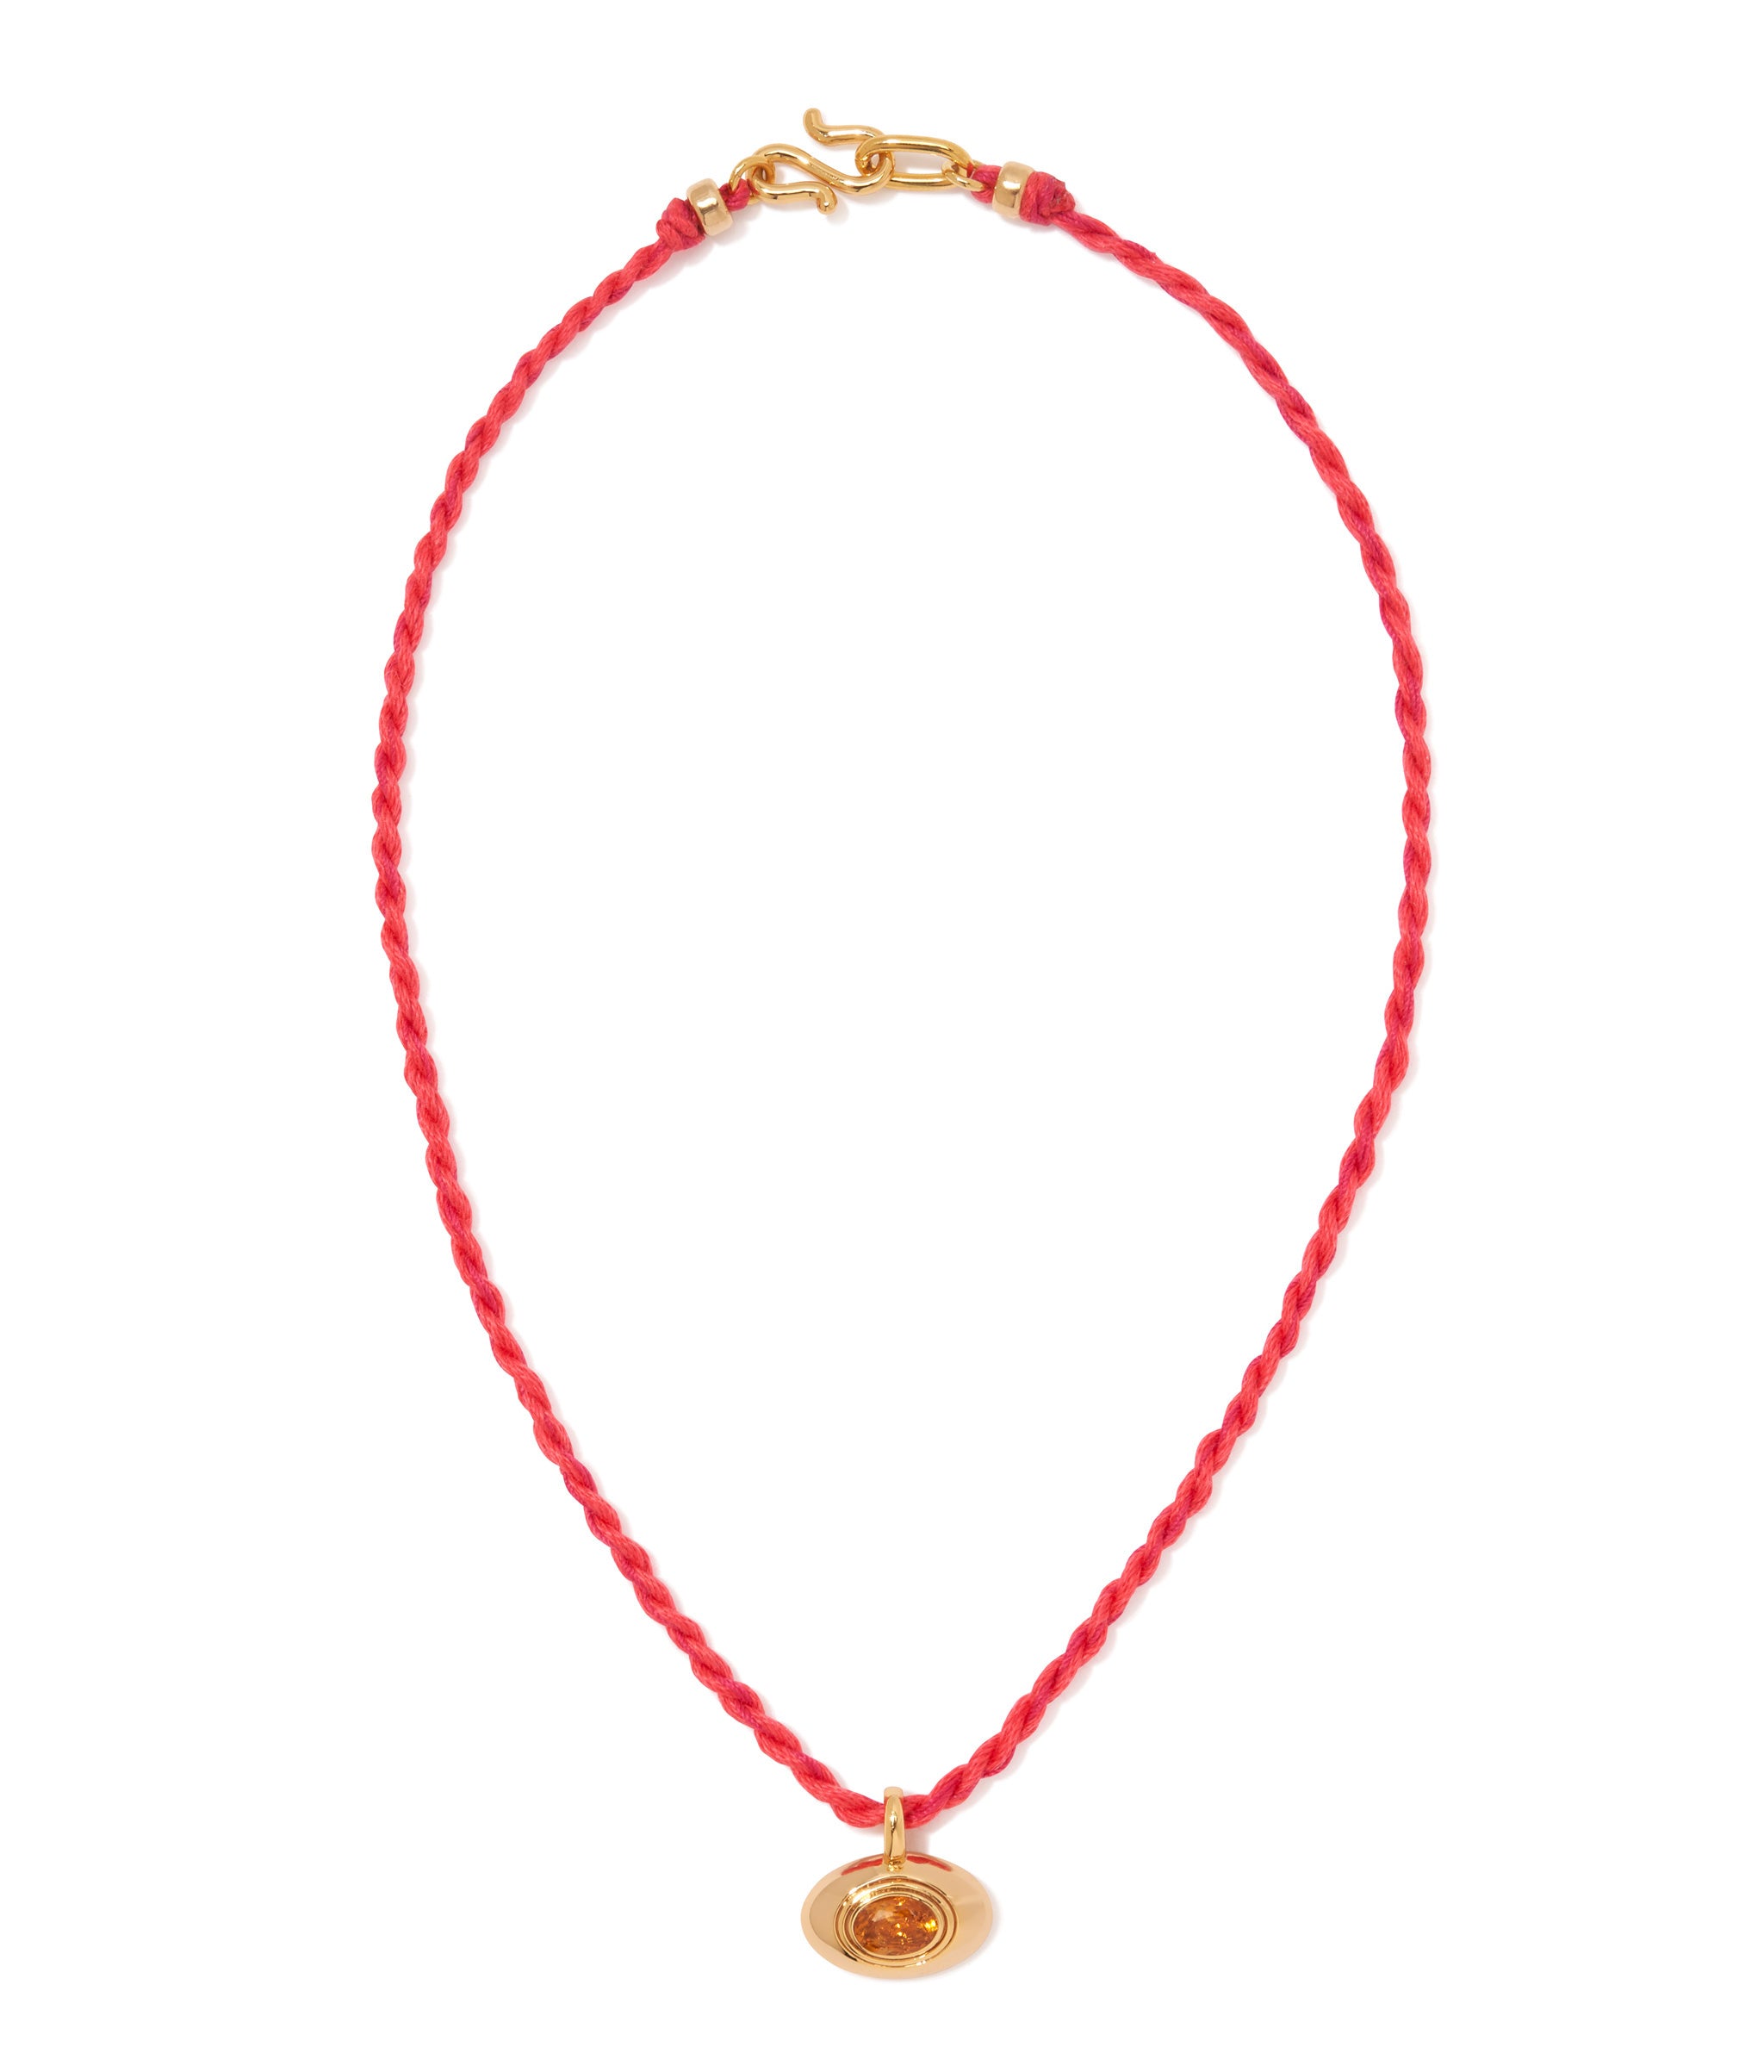 Best Friend Necklace in Bougainvillea. Hand-twisted red hot cord necklace with gold oval pendant inset with citrine.